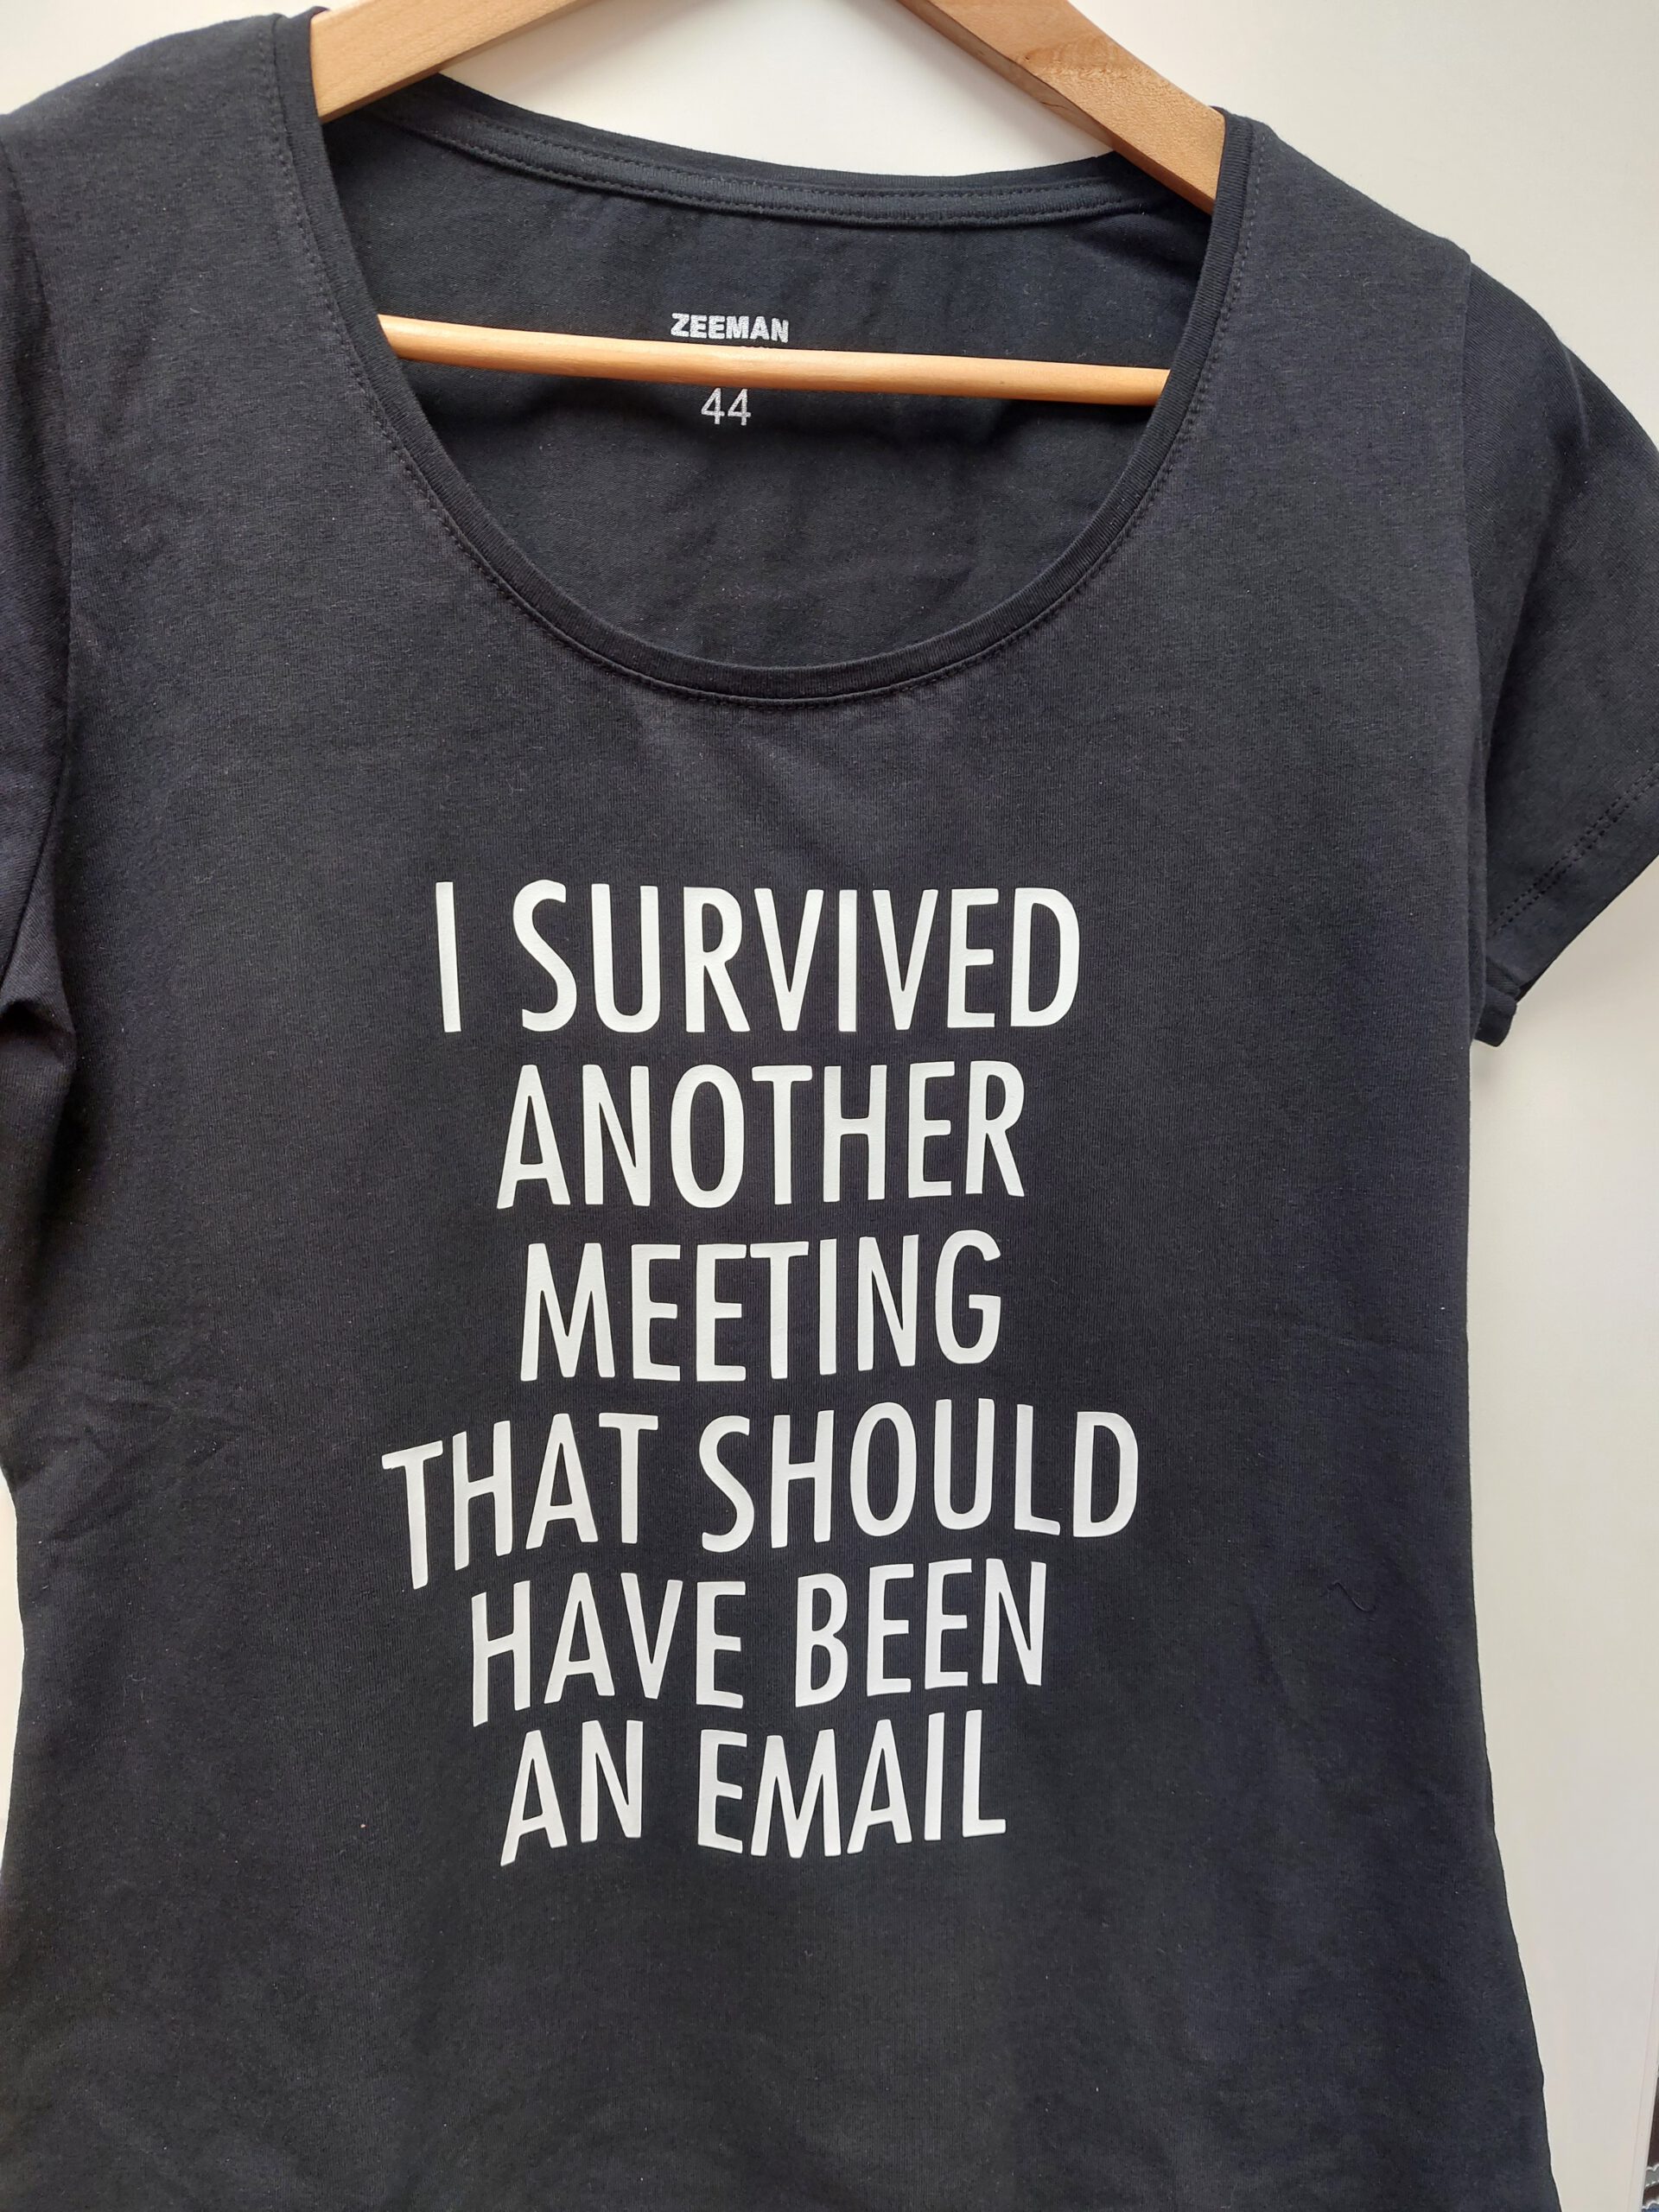 i servived another meeting that should have been an email